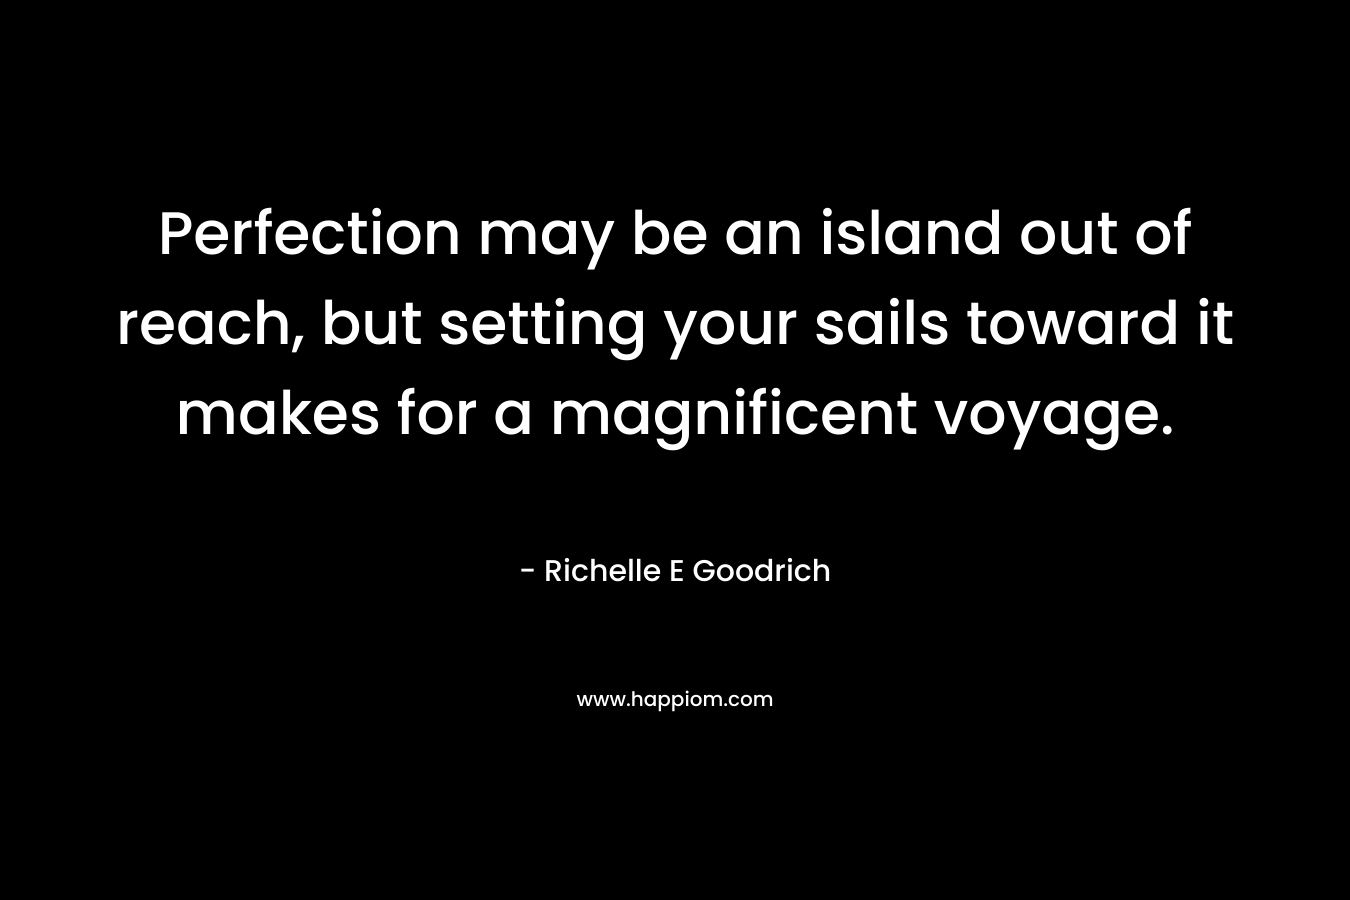 Perfection may be an island out of reach, but setting your sails toward it makes for a magnificent voyage.